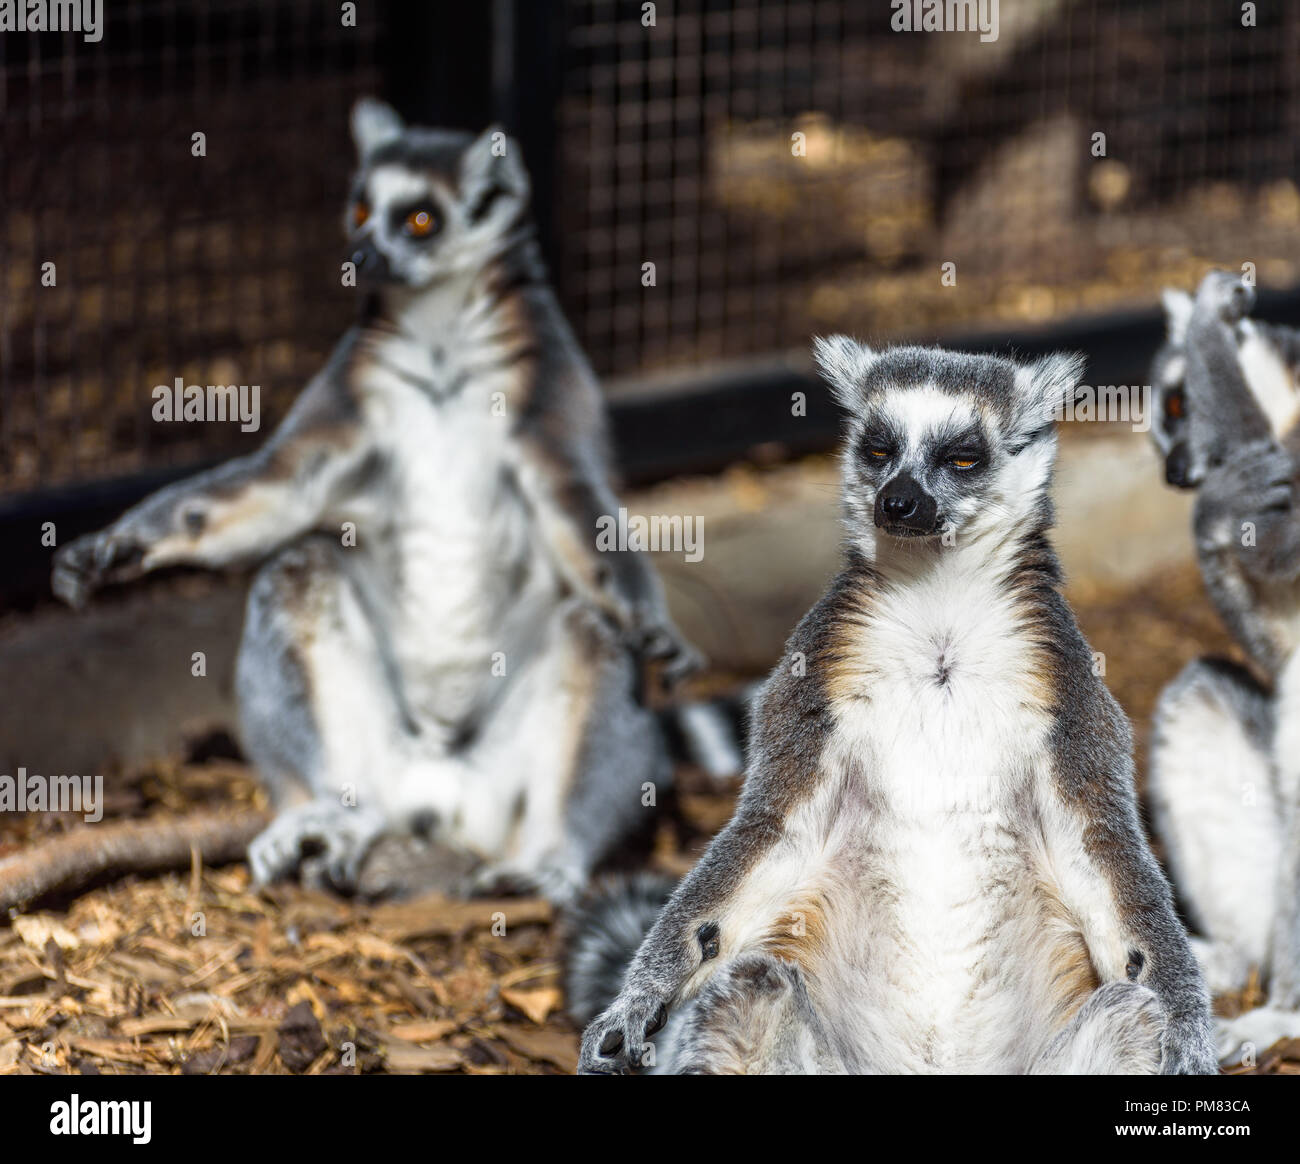 A small group of Ring-tailed lemurs sunbathing in captivity. Stock Photo